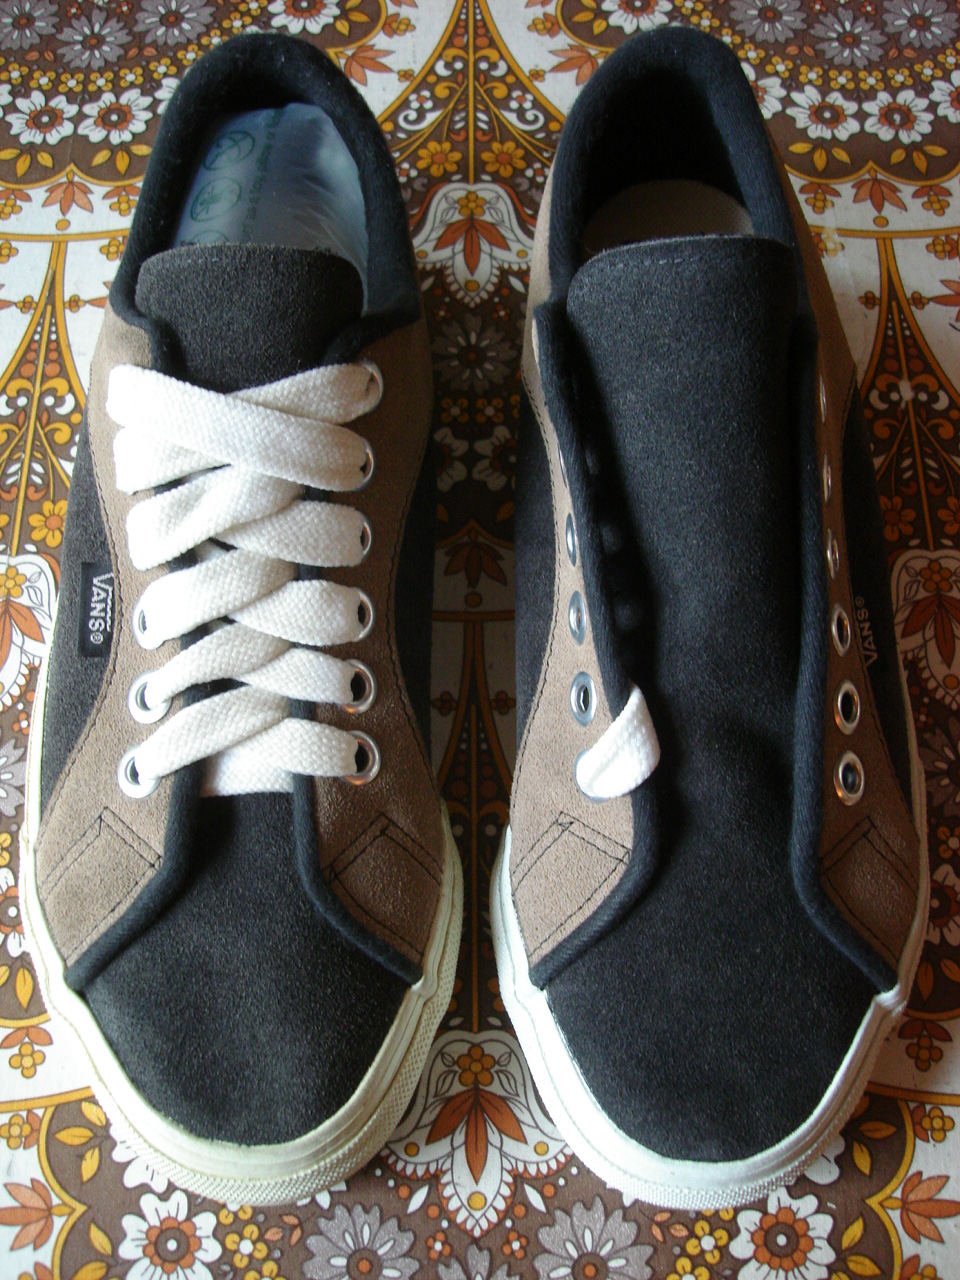 theothersideofthepillow: vintage VANS style #86 LAMPIN 2-tone charcoal